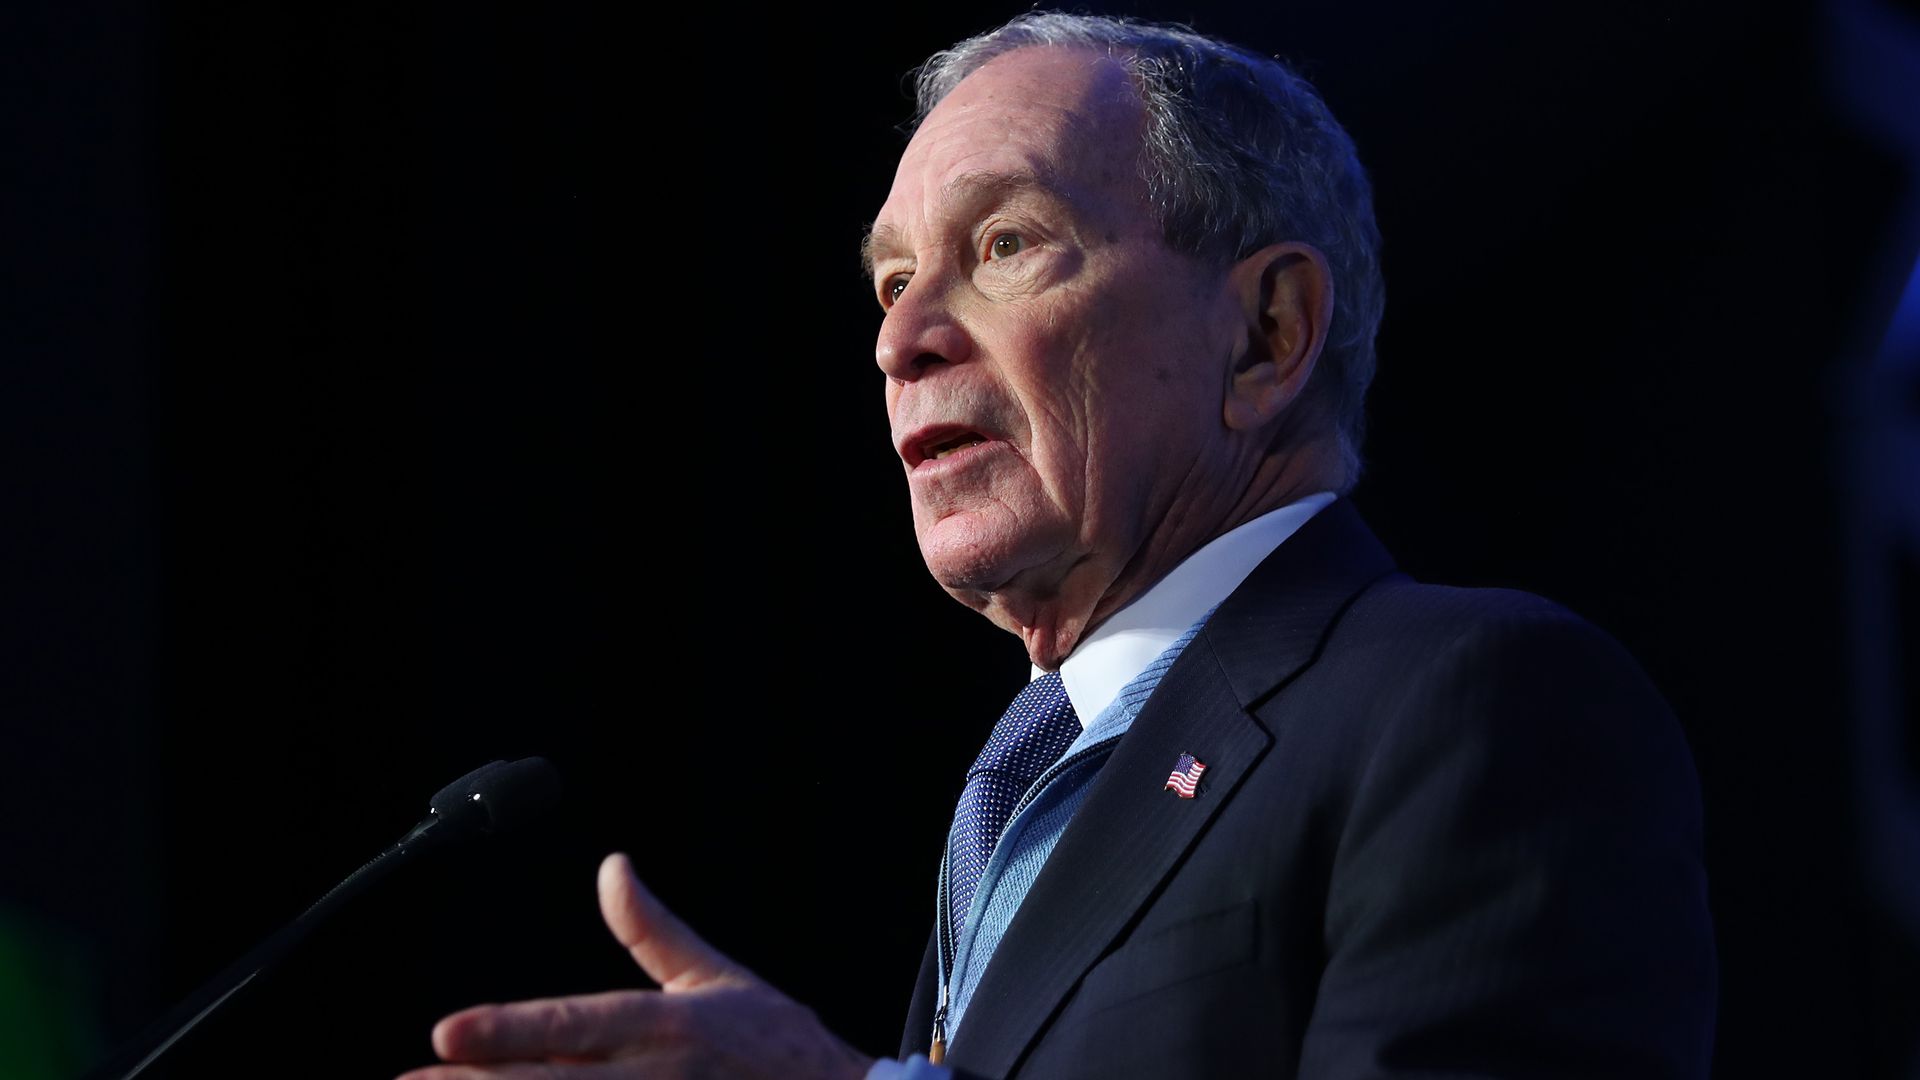 Mike Bloomberg speaks during the Blue NC Celebration Dinner held at the Hilton Charlotte University Place on February 29, 2020 in Charlotte, North Carolina. 